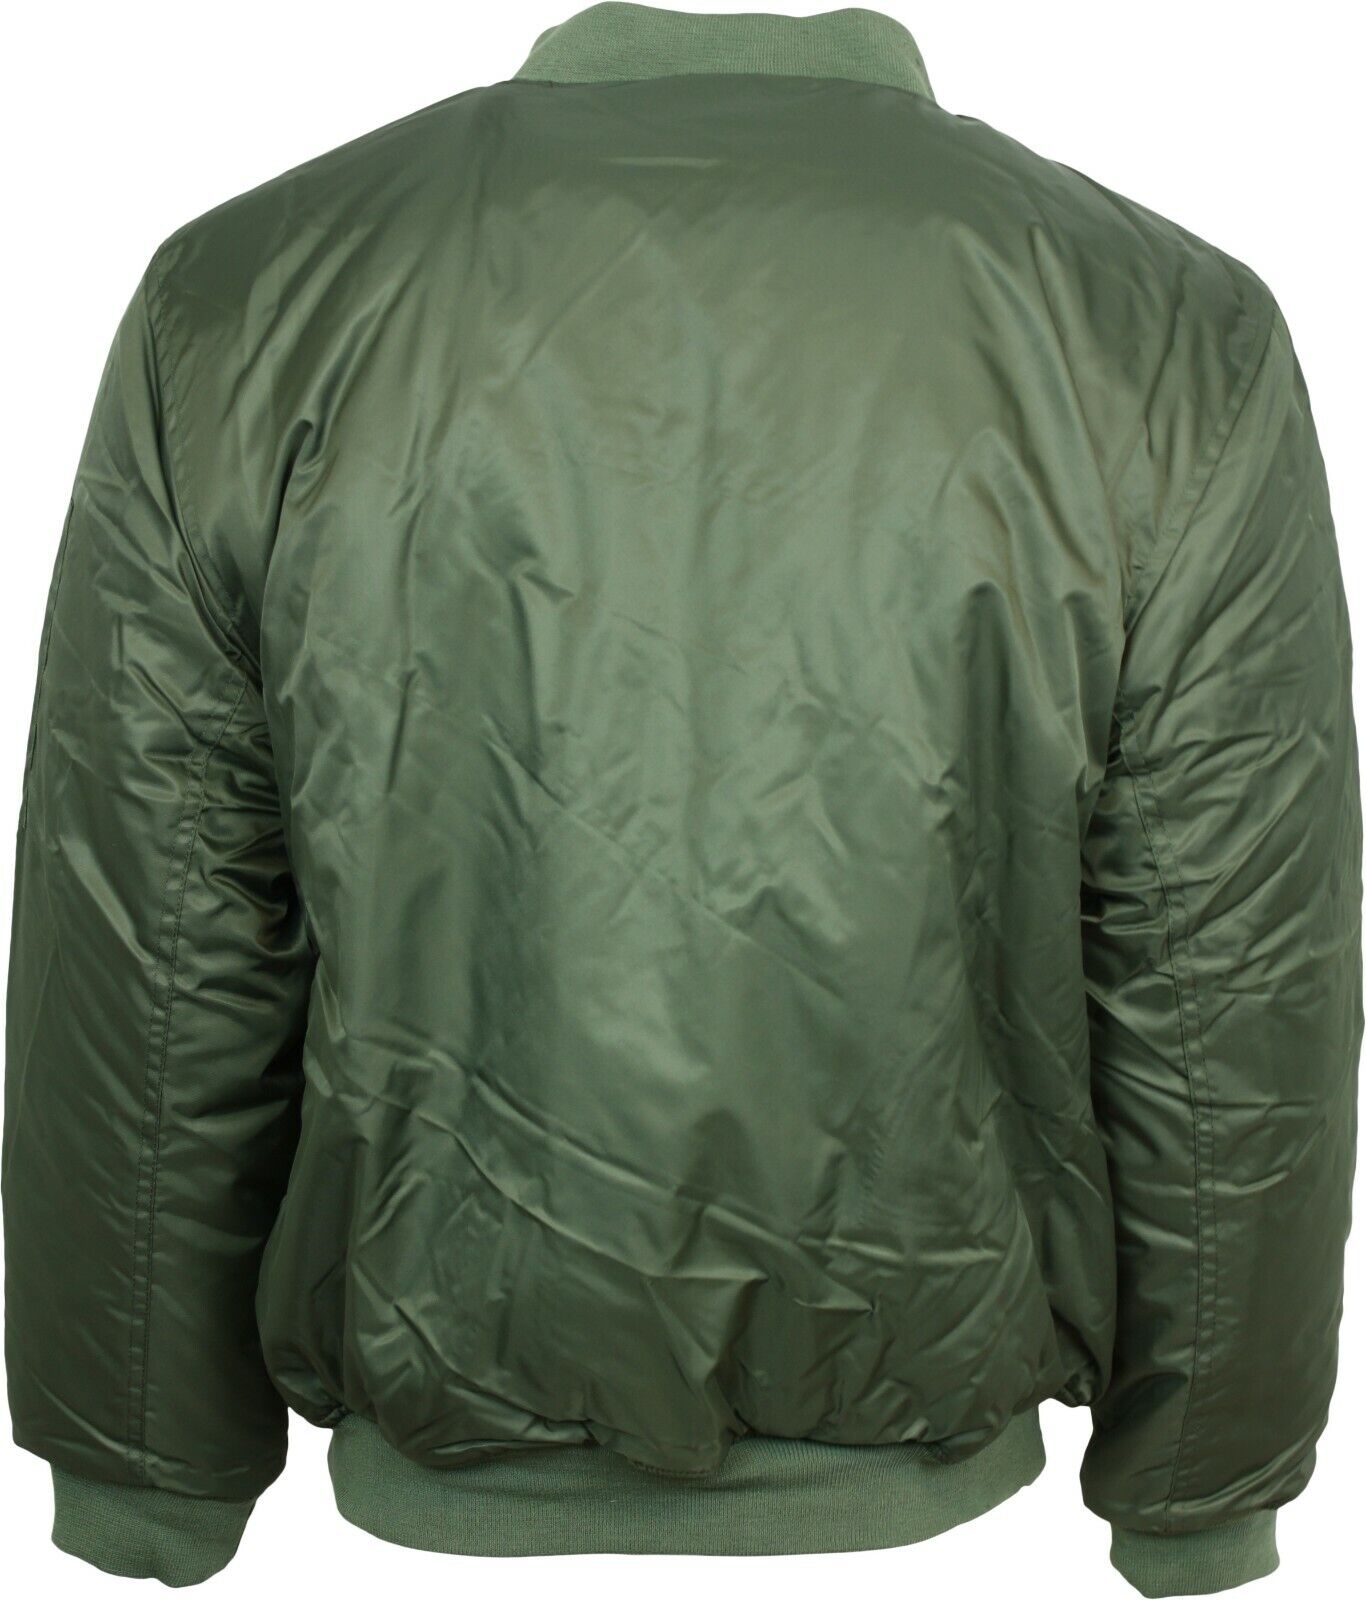 Relco Classic MA-1 Flight Jacket Bomber Pilot Military Army Olive 